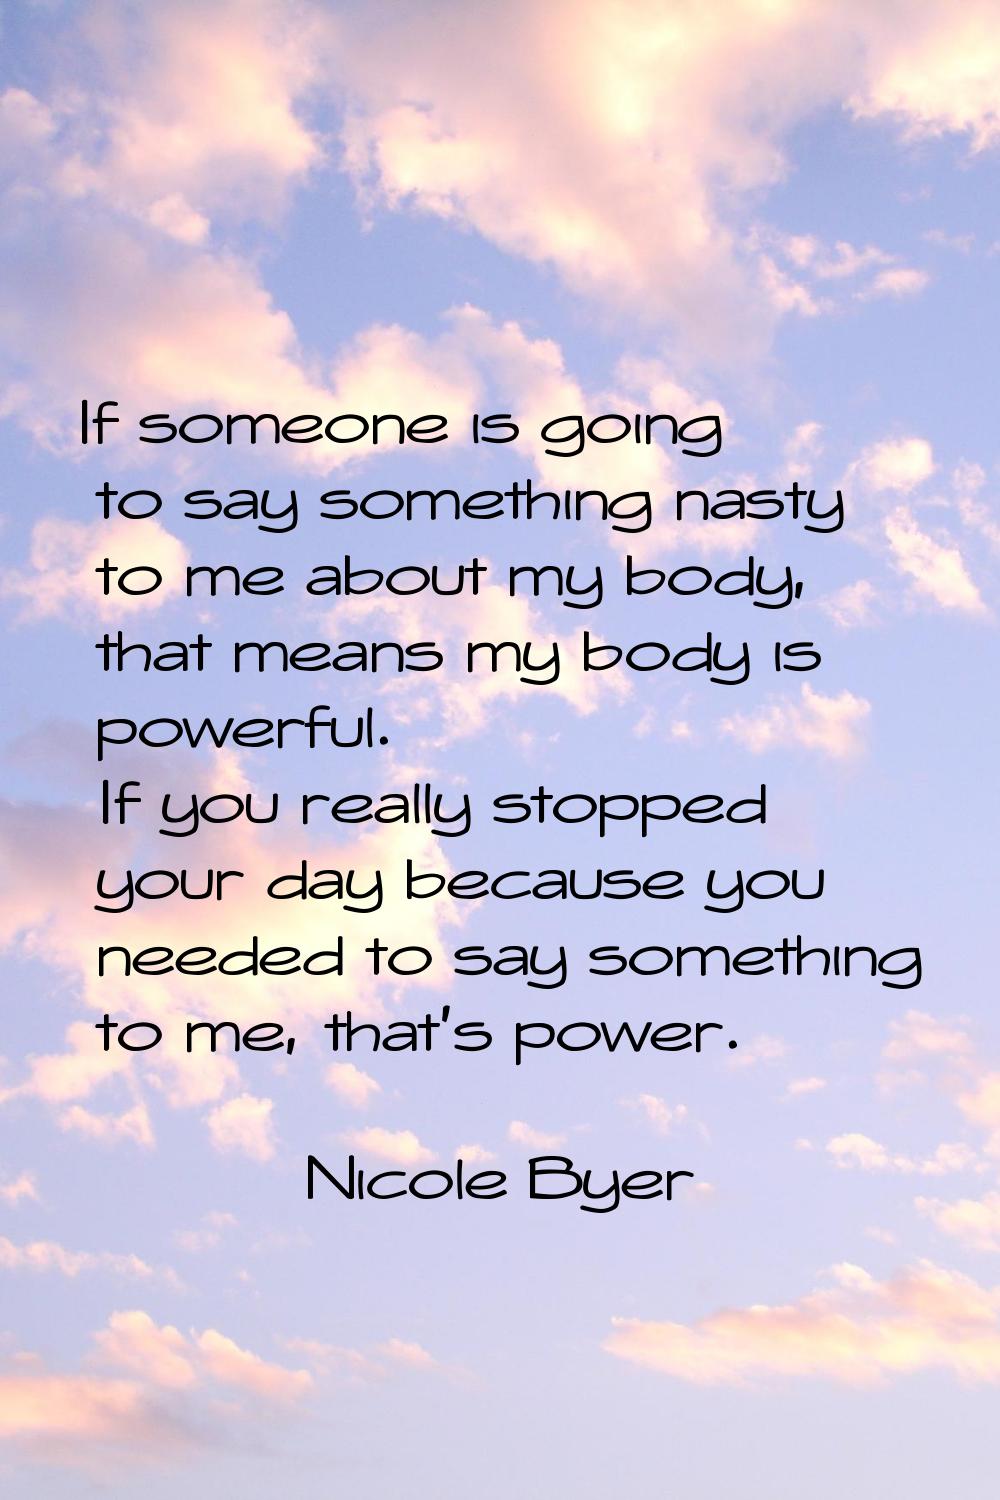 If someone is going to say something nasty to me about my body, that means my body is powerful. If 